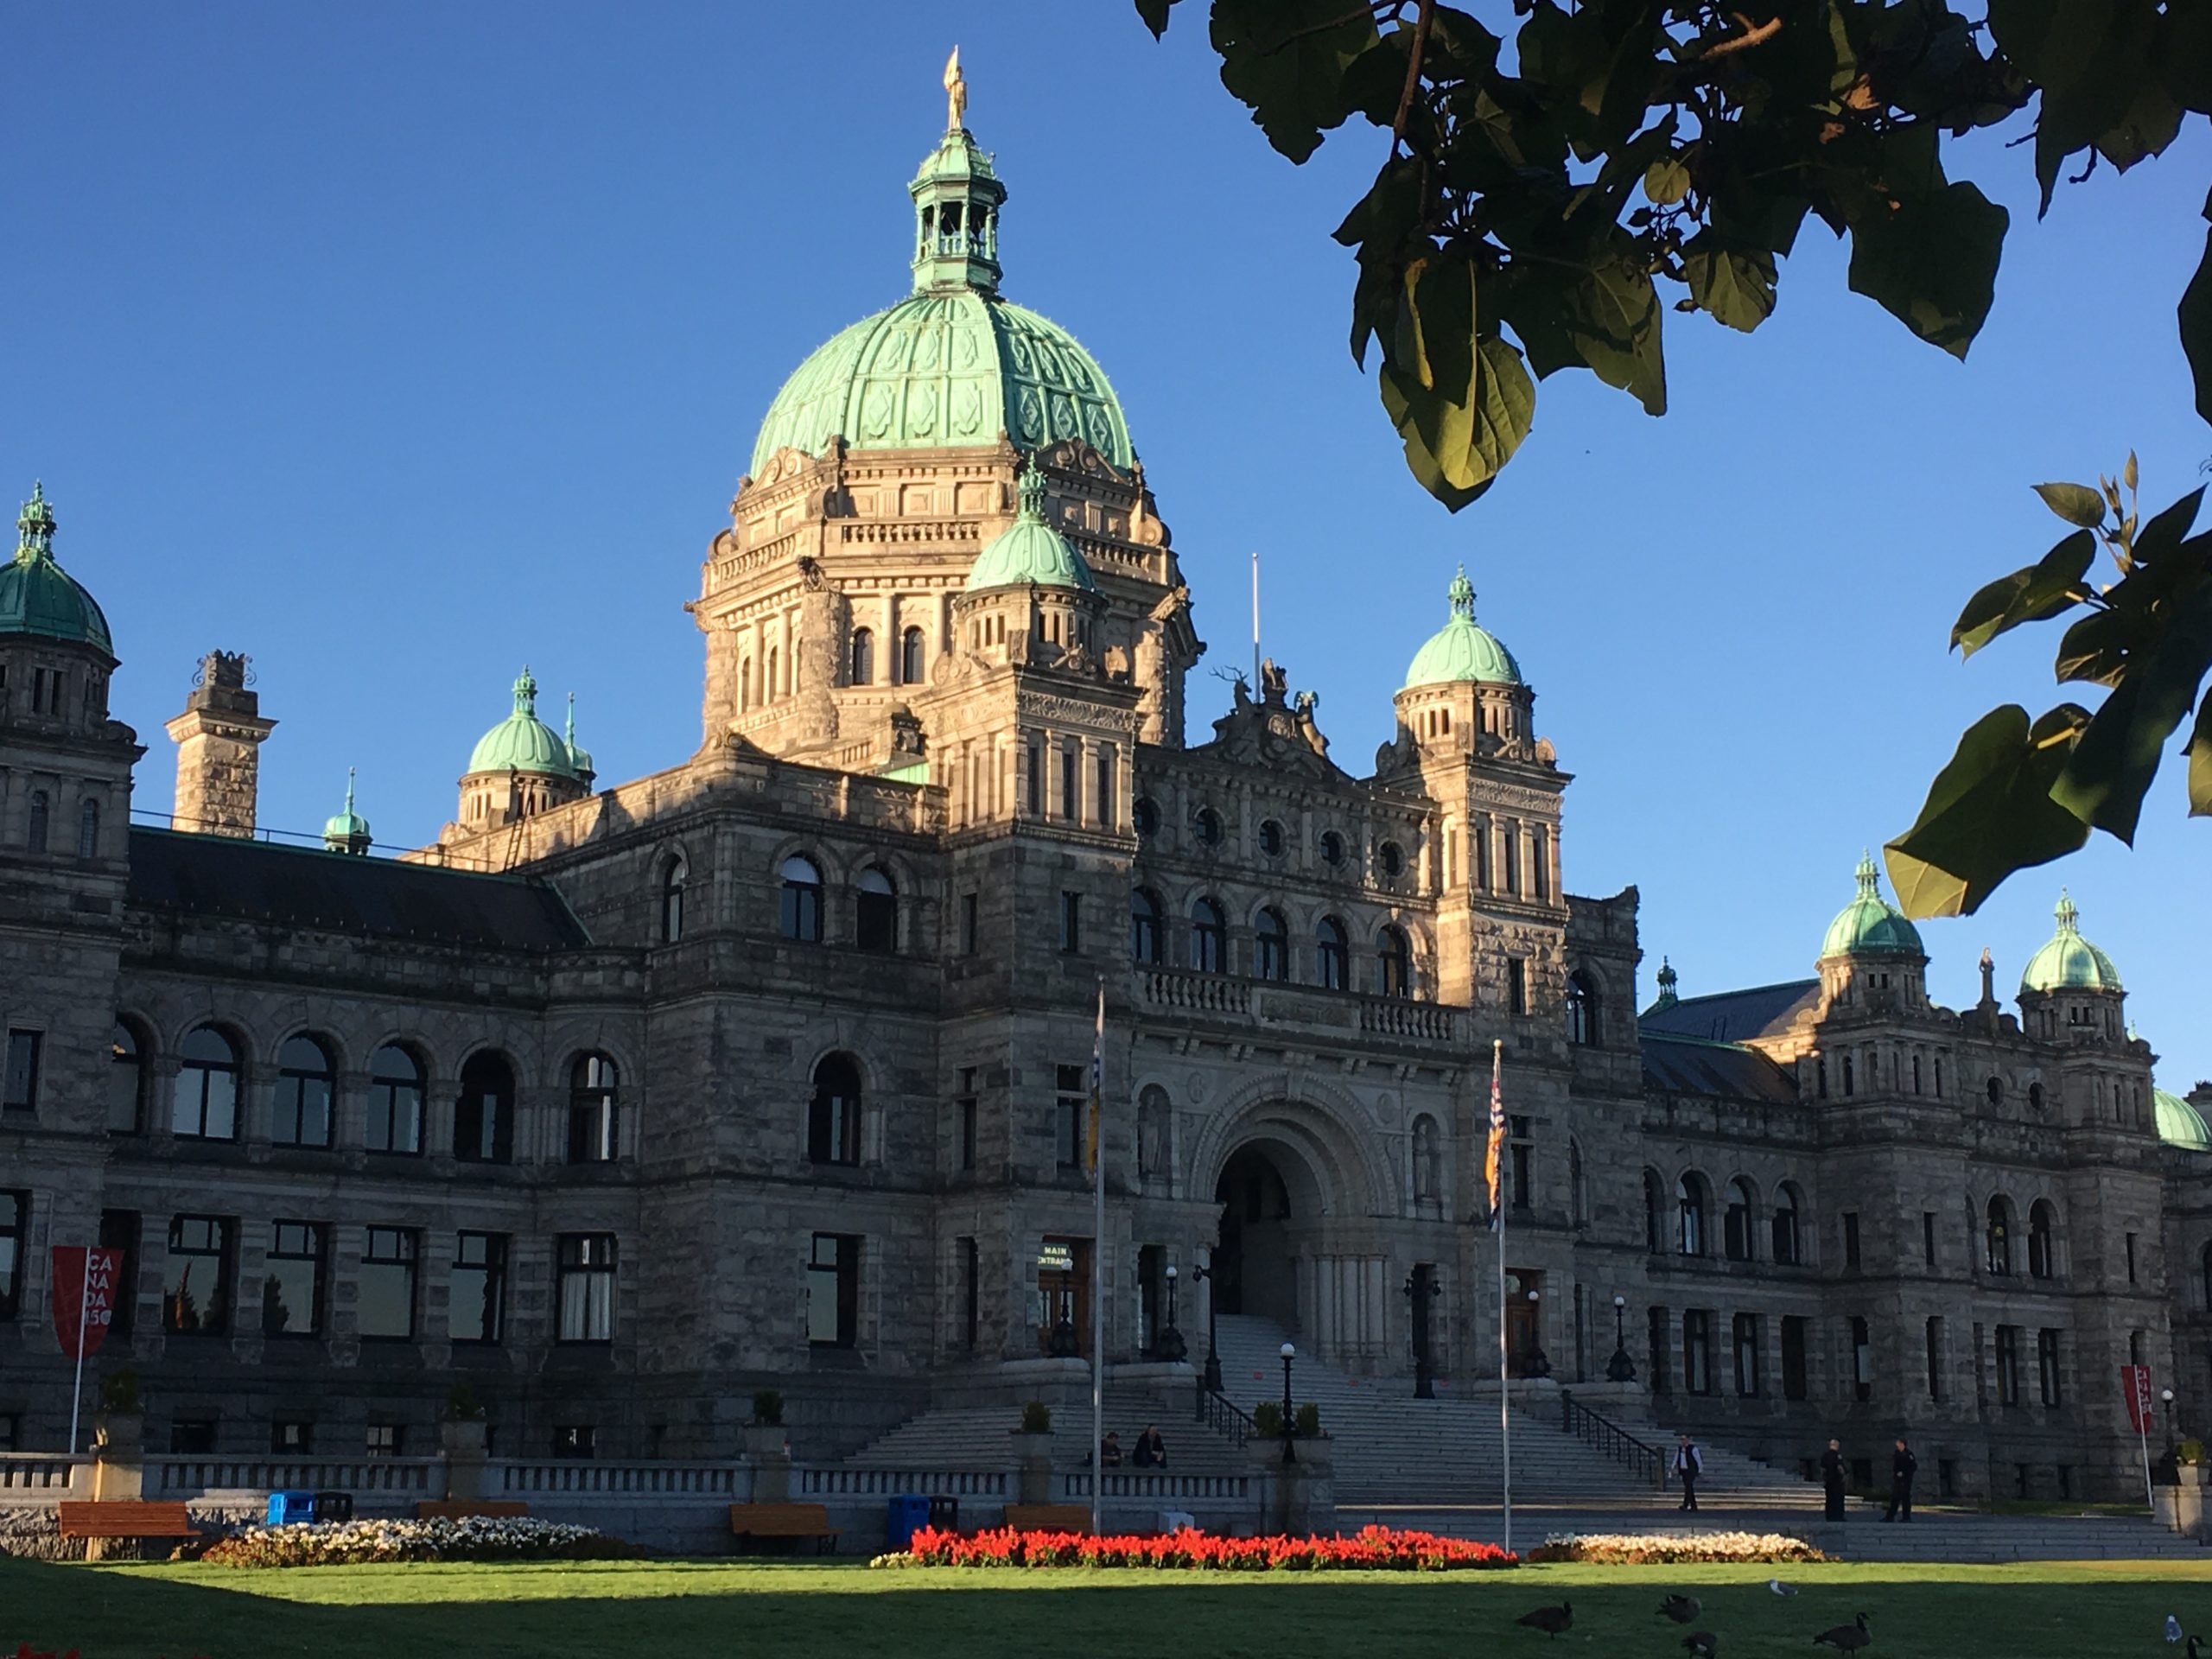 ICBA NEWS RELEASE: BC Budget – In Times of Crisis, Double Down on the Future